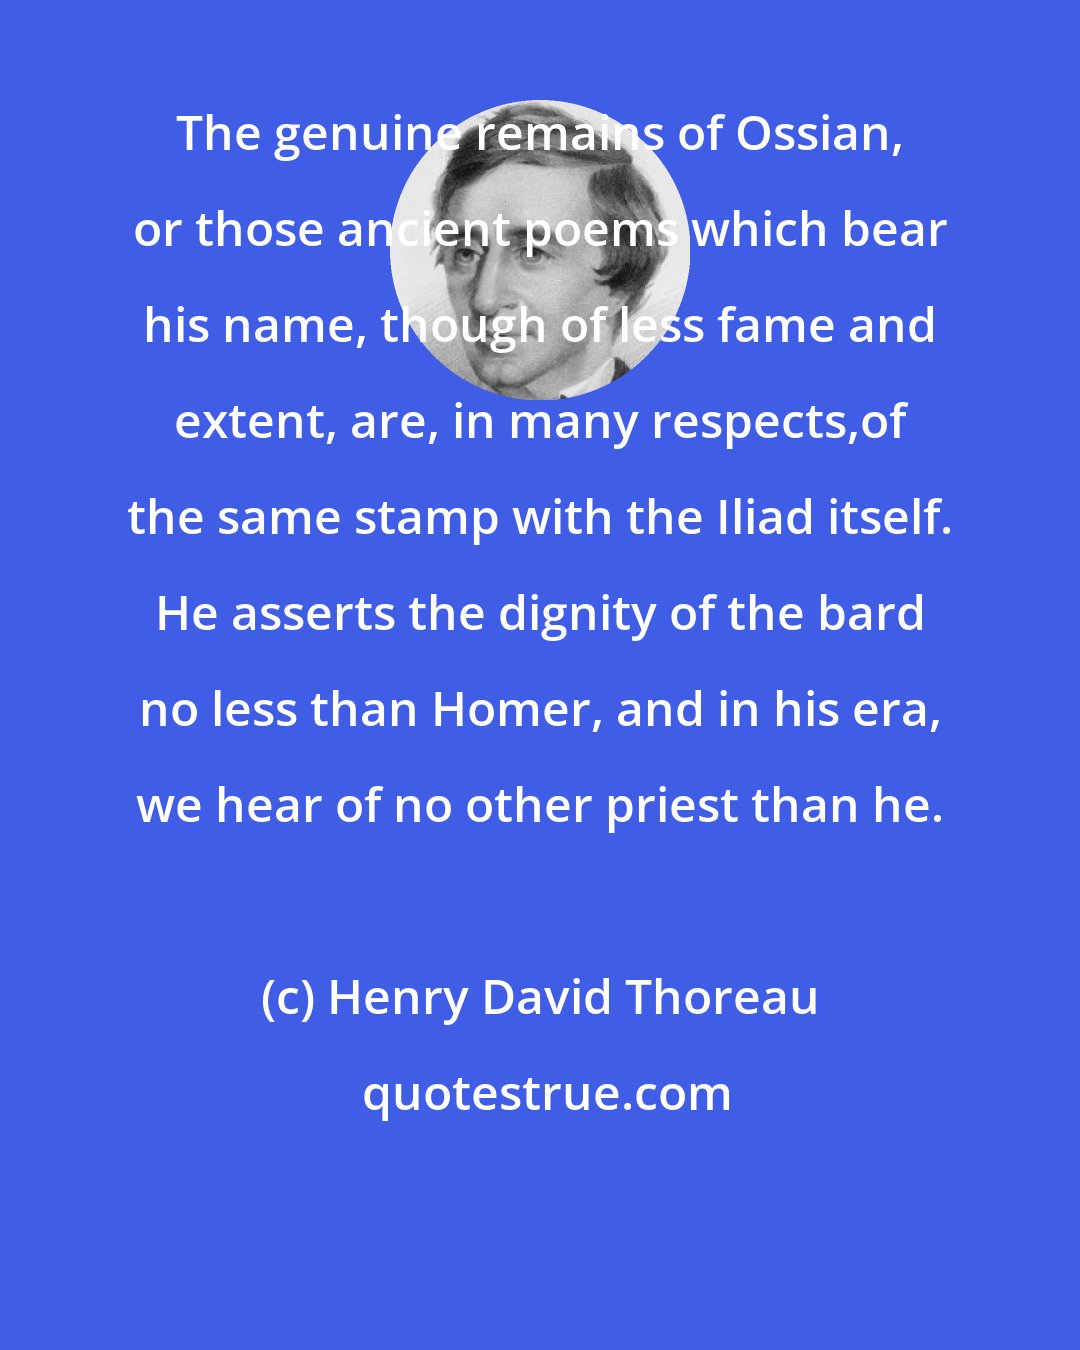 Henry David Thoreau: The genuine remains of Ossian, or those ancient poems which bear his name, though of less fame and extent, are, in many respects,of the same stamp with the Iliad itself. He asserts the dignity of the bard no less than Homer, and in his era, we hear of no other priest than he.